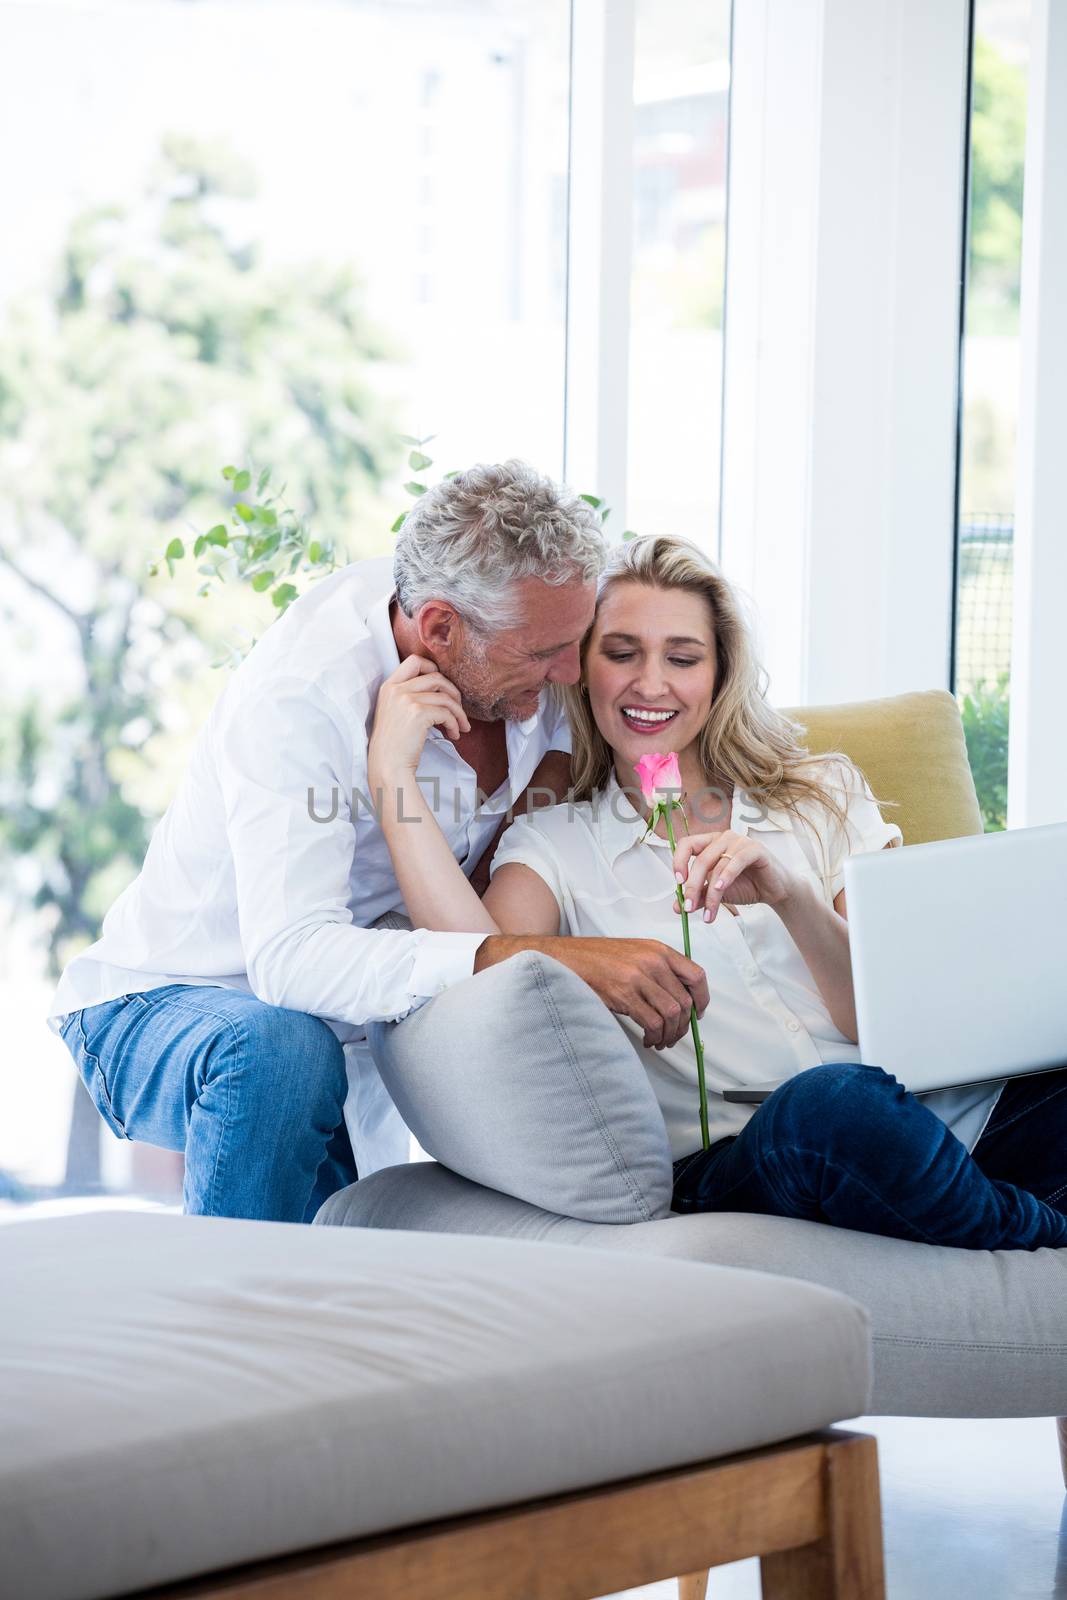 Romantic smiling mature couple with rose by Wavebreakmedia